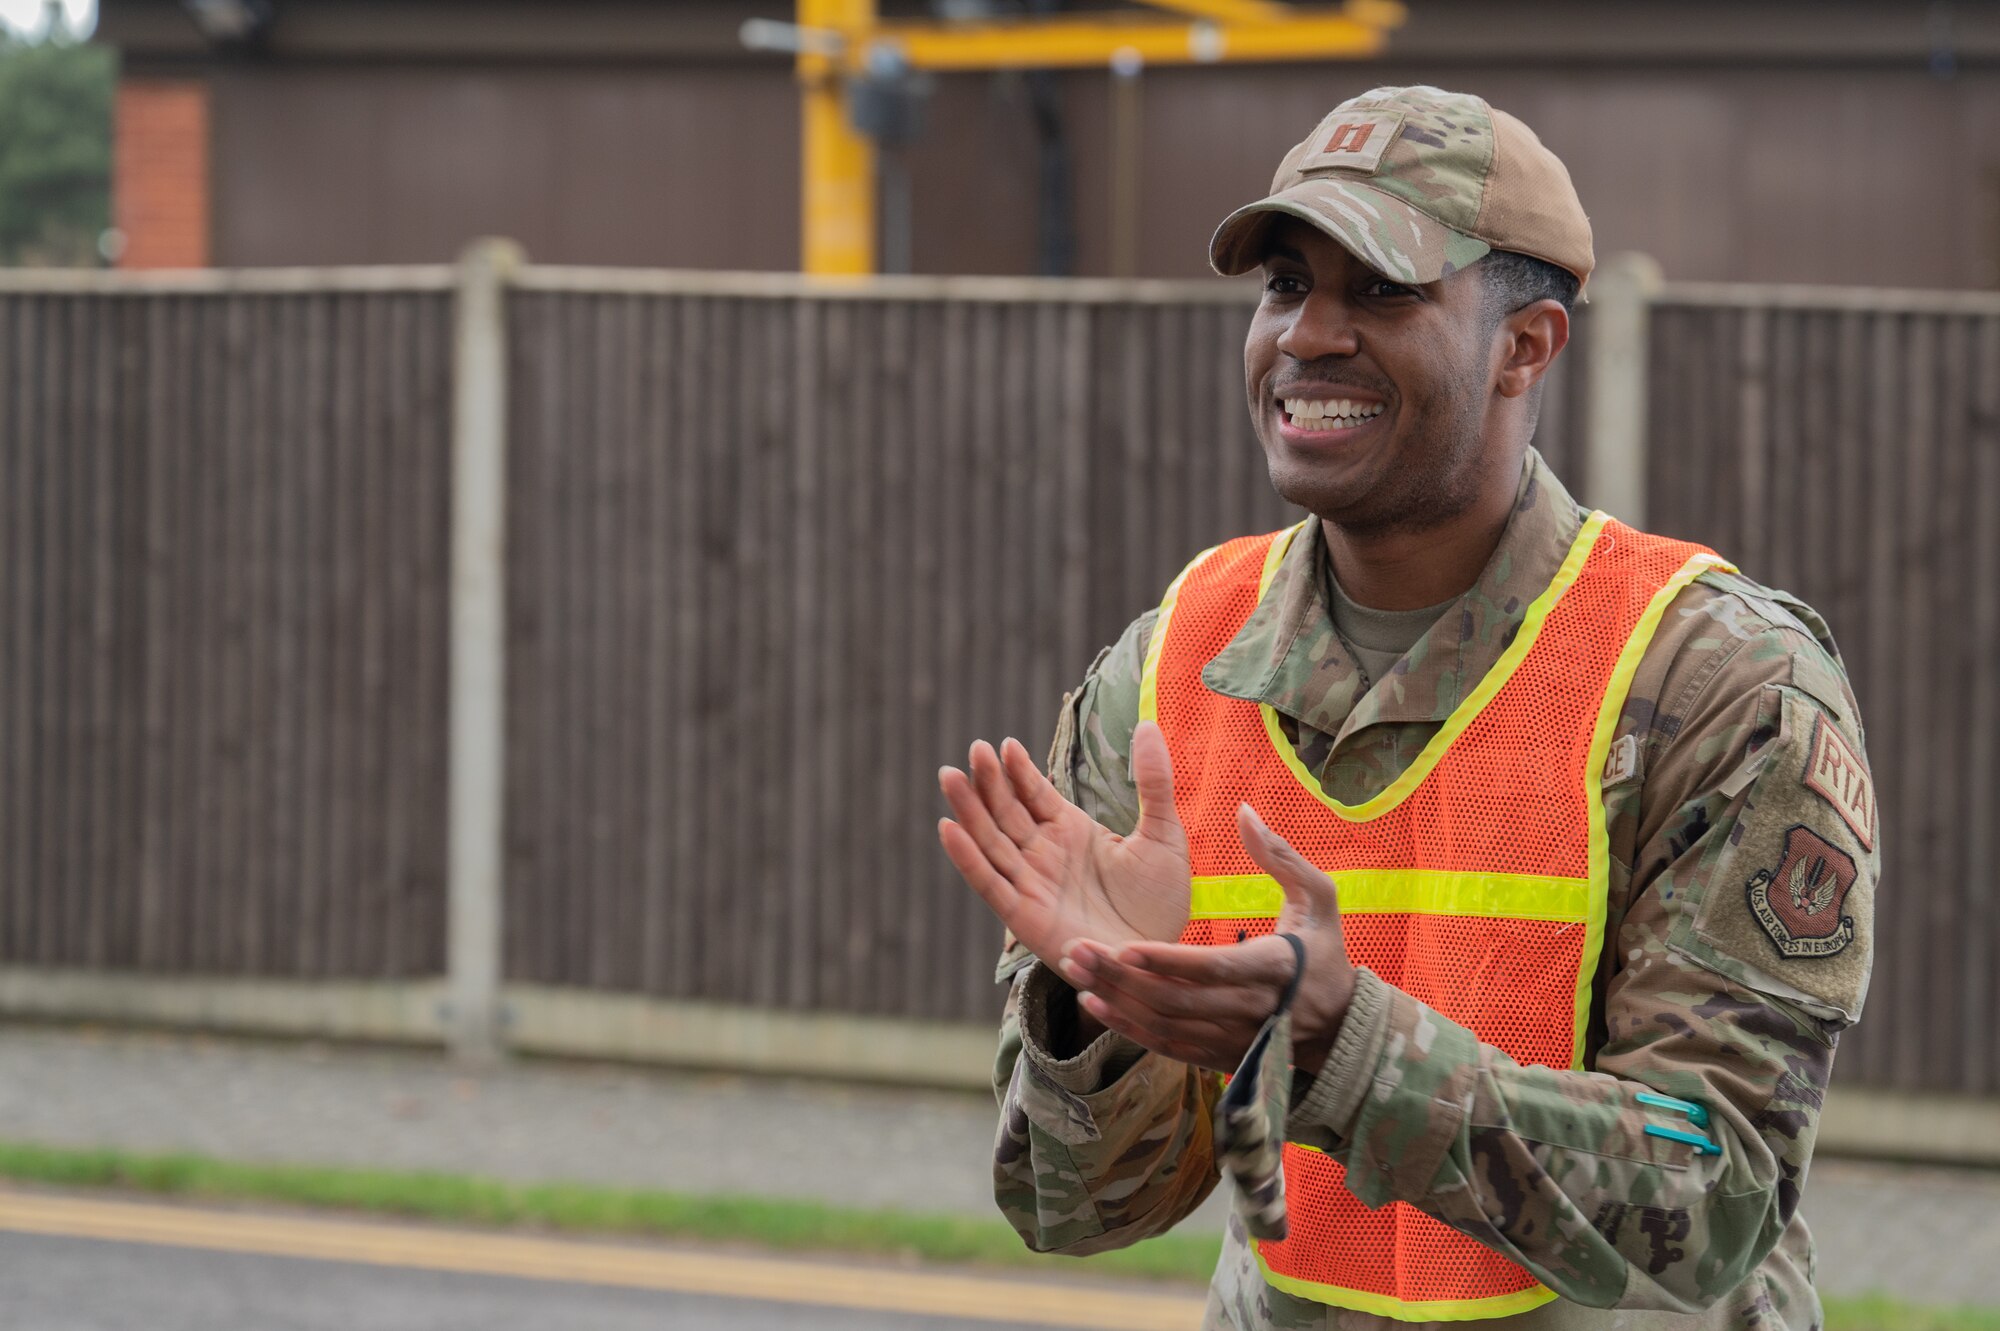 U.S. Air Force  Chaplain (Capt.) Benjamin Mattocks, 100th Air Refueling Wing, cheers on participants during the Black History Month 5K run and walk, Feb. 23, 2023, at Royal Air Force Mildenhall, England.